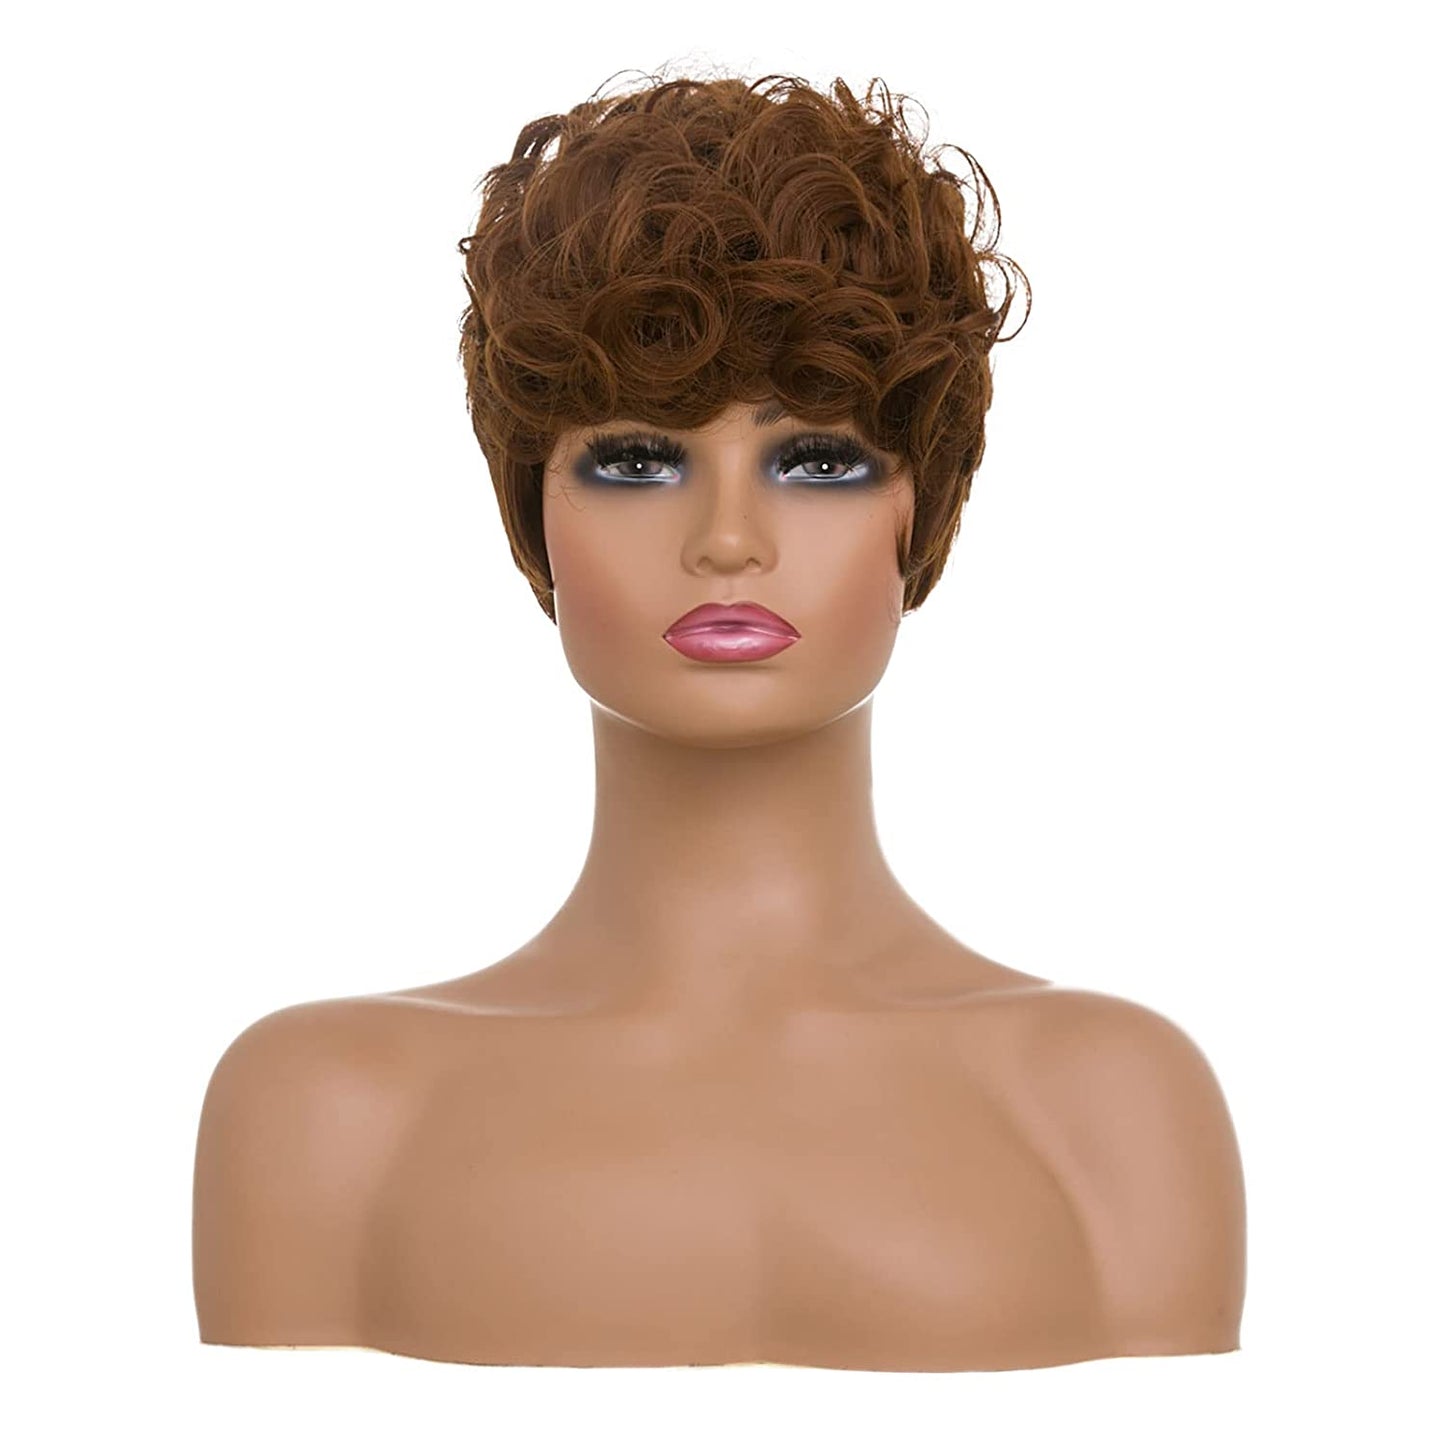 Hair Replacement Short Pixie Cut Wig for Black Women Auburn Brown Pixie Cut Wig with Bangs Auburn Short Curly Wigs for Black Women Natural Wavy Layered Pixie Wig for African... Color: Pixie Curly-Auburn Brown different hair replacement system products including men’s toupees, women’s wigs, toppers and hair extensions, wholesalers, including online shop owners, salon owners, hair stylists and regional wig and hair system distributors. feelmorelikeuhair.com